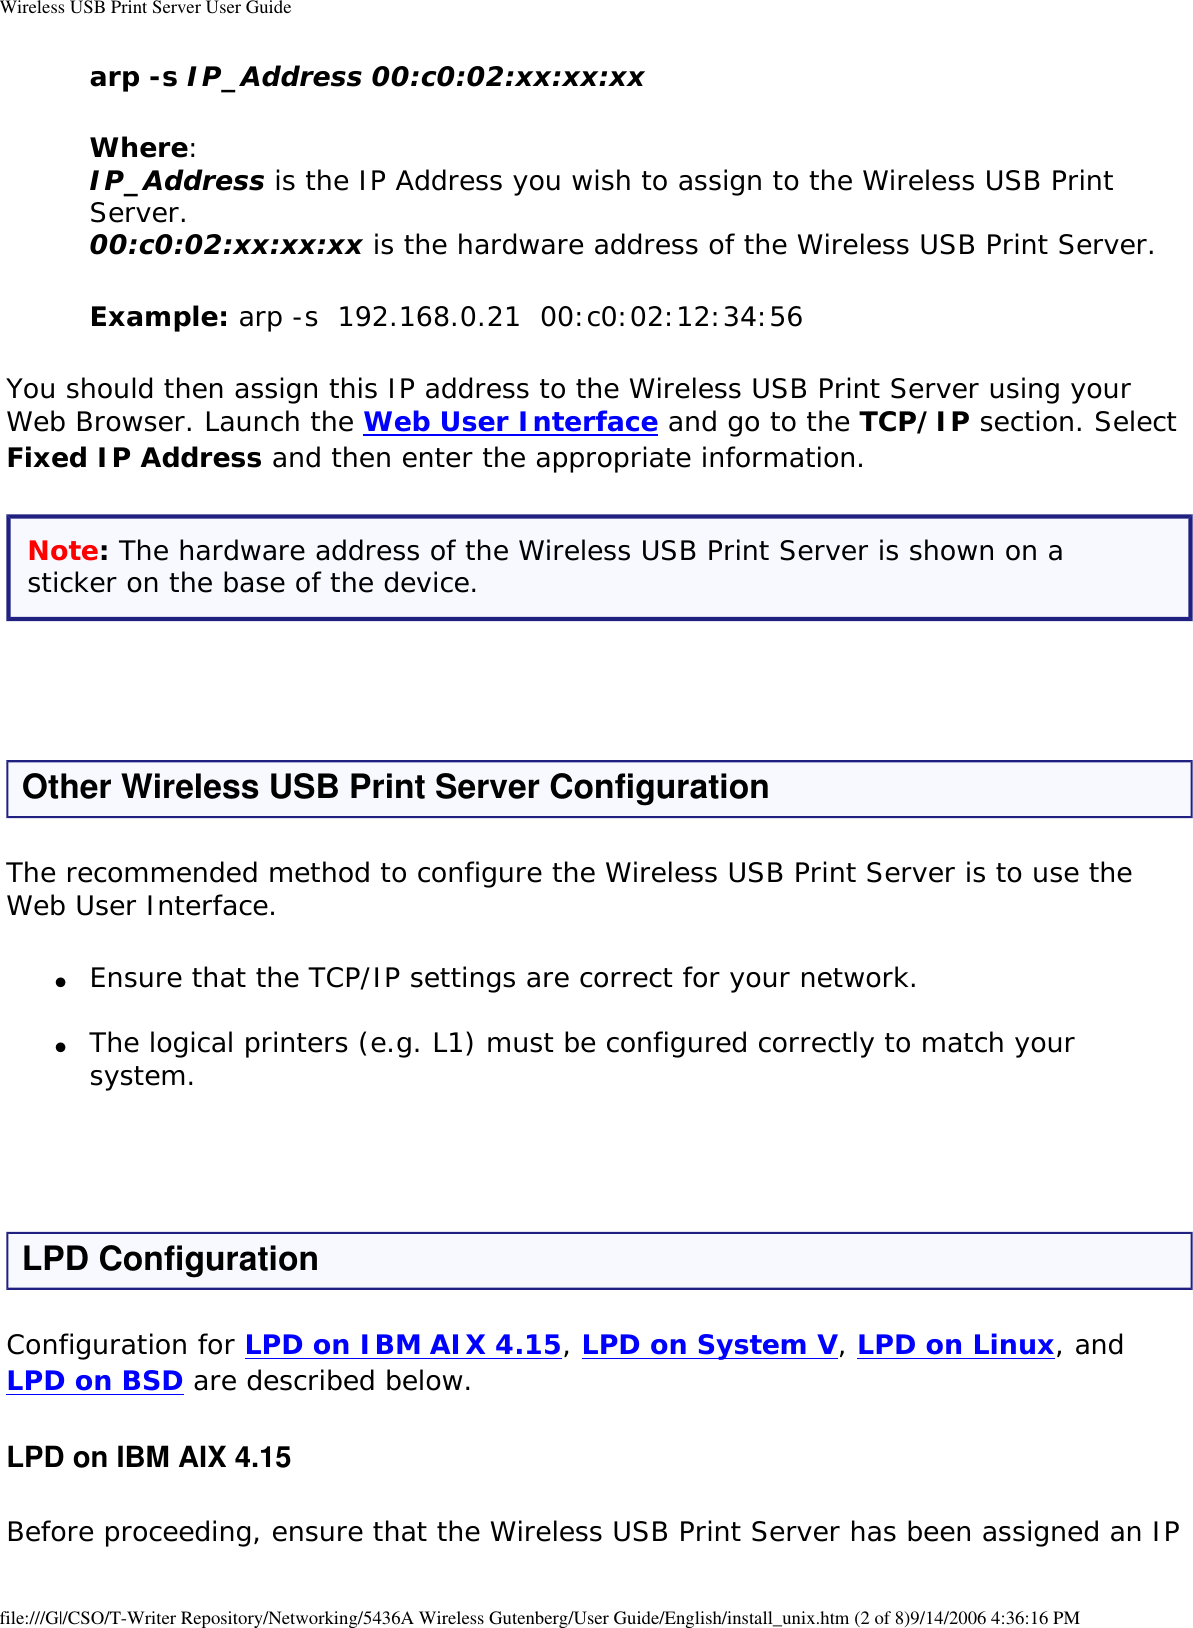 Wireless USB Print Server User Guidearp -s IP_Address 00:c0:02:xx:xx:xx Where: IP_Address is the IP Address you wish to assign to the Wireless USB Print Server. 00:c0:02:xx:xx:xx is the hardware address of the Wireless USB Print Server.Example: arp -s  192.168.0.21  00:c0:02:12:34:56You should then assign this IP address to the Wireless USB Print Server using your Web Browser. Launch the Web User Interface and go to the TCP/IP section. Select Fixed IP Address and then enter the appropriate information.Note: The hardware address of the Wireless USB Print Server is shown on a sticker on the base of the device. Other Wireless USB Print Server ConfigurationThe recommended method to configure the Wireless USB Print Server is to use the Web User Interface.●     Ensure that the TCP/IP settings are correct for your network. ●     The logical printers (e.g. L1) must be configured correctly to match your system.  LPD ConfigurationConfiguration for LPD on IBM AIX 4.15, LPD on System V, LPD on Linux, and LPD on BSD are described below.LPD on IBM AIX 4.15Before proceeding, ensure that the Wireless USB Print Server has been assigned an IP file:///G|/CSO/T-Writer Repository/Networking/5436A Wireless Gutenberg/User Guide/English/install_unix.htm (2 of 8)9/14/2006 4:36:16 PM